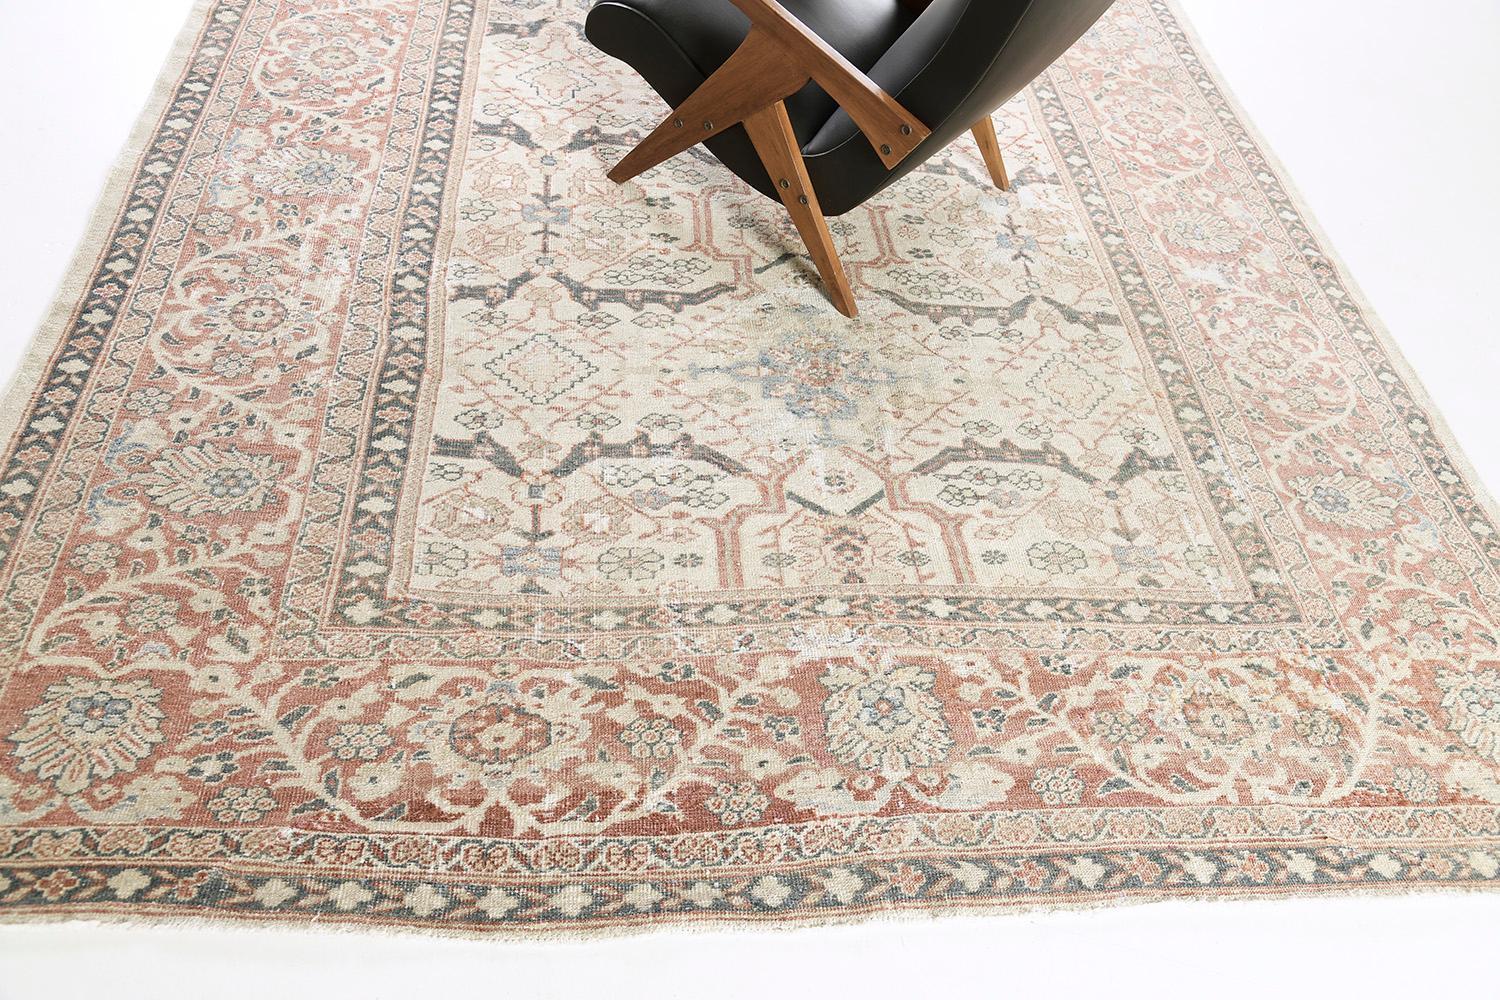 A fabulous antique Persian Mahal that features its dazzling design. Focused on its allover composition of botanical motifs, this majestic rug features the warm and aesthetic tones of ivory, terracotta, and aegean blue accents. The attention to